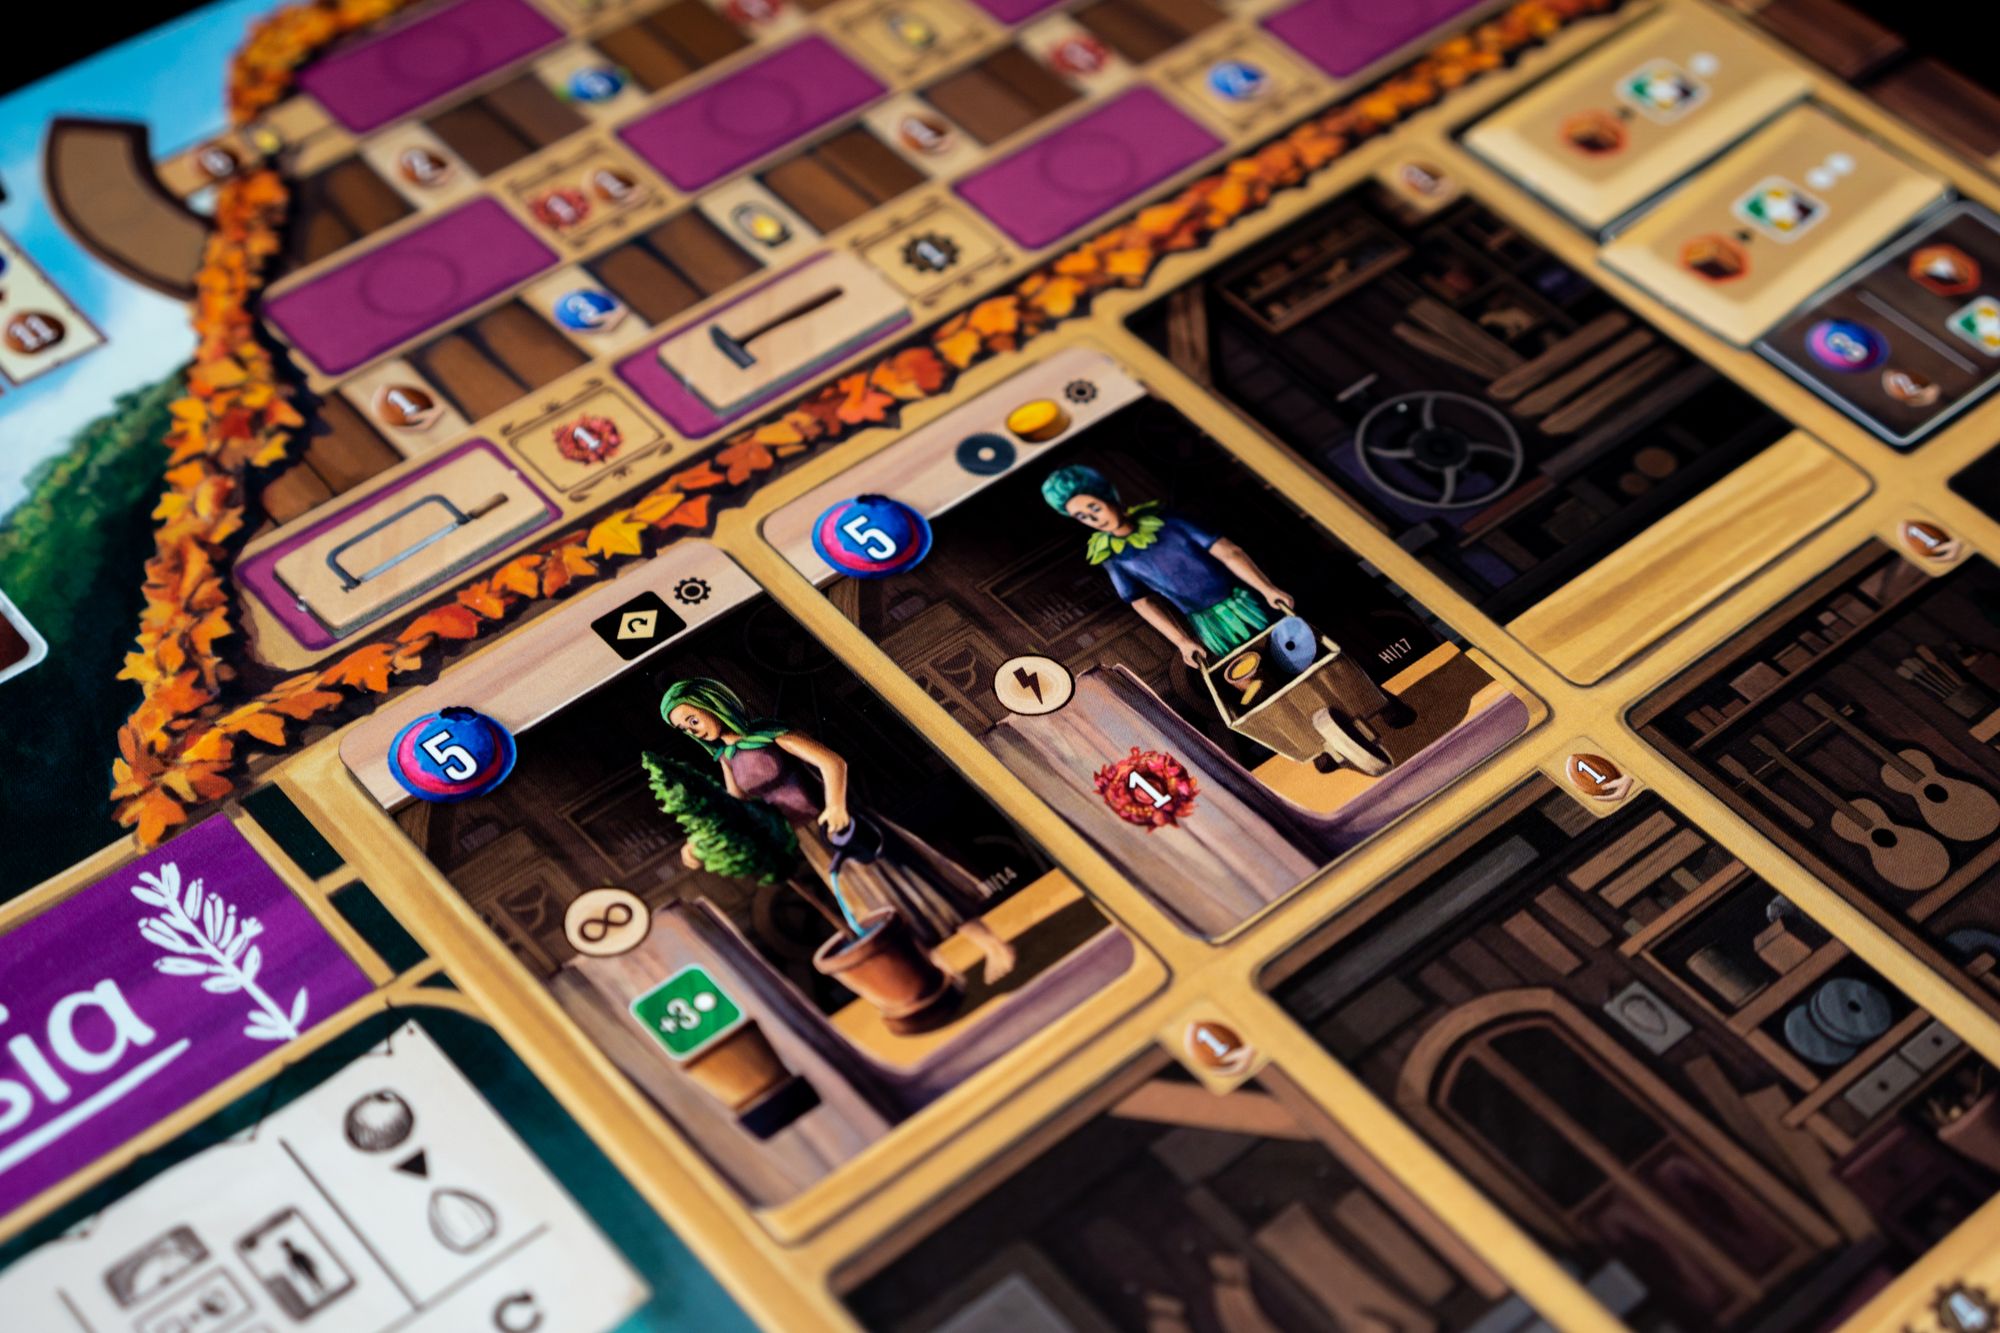 Review: Woodcraft